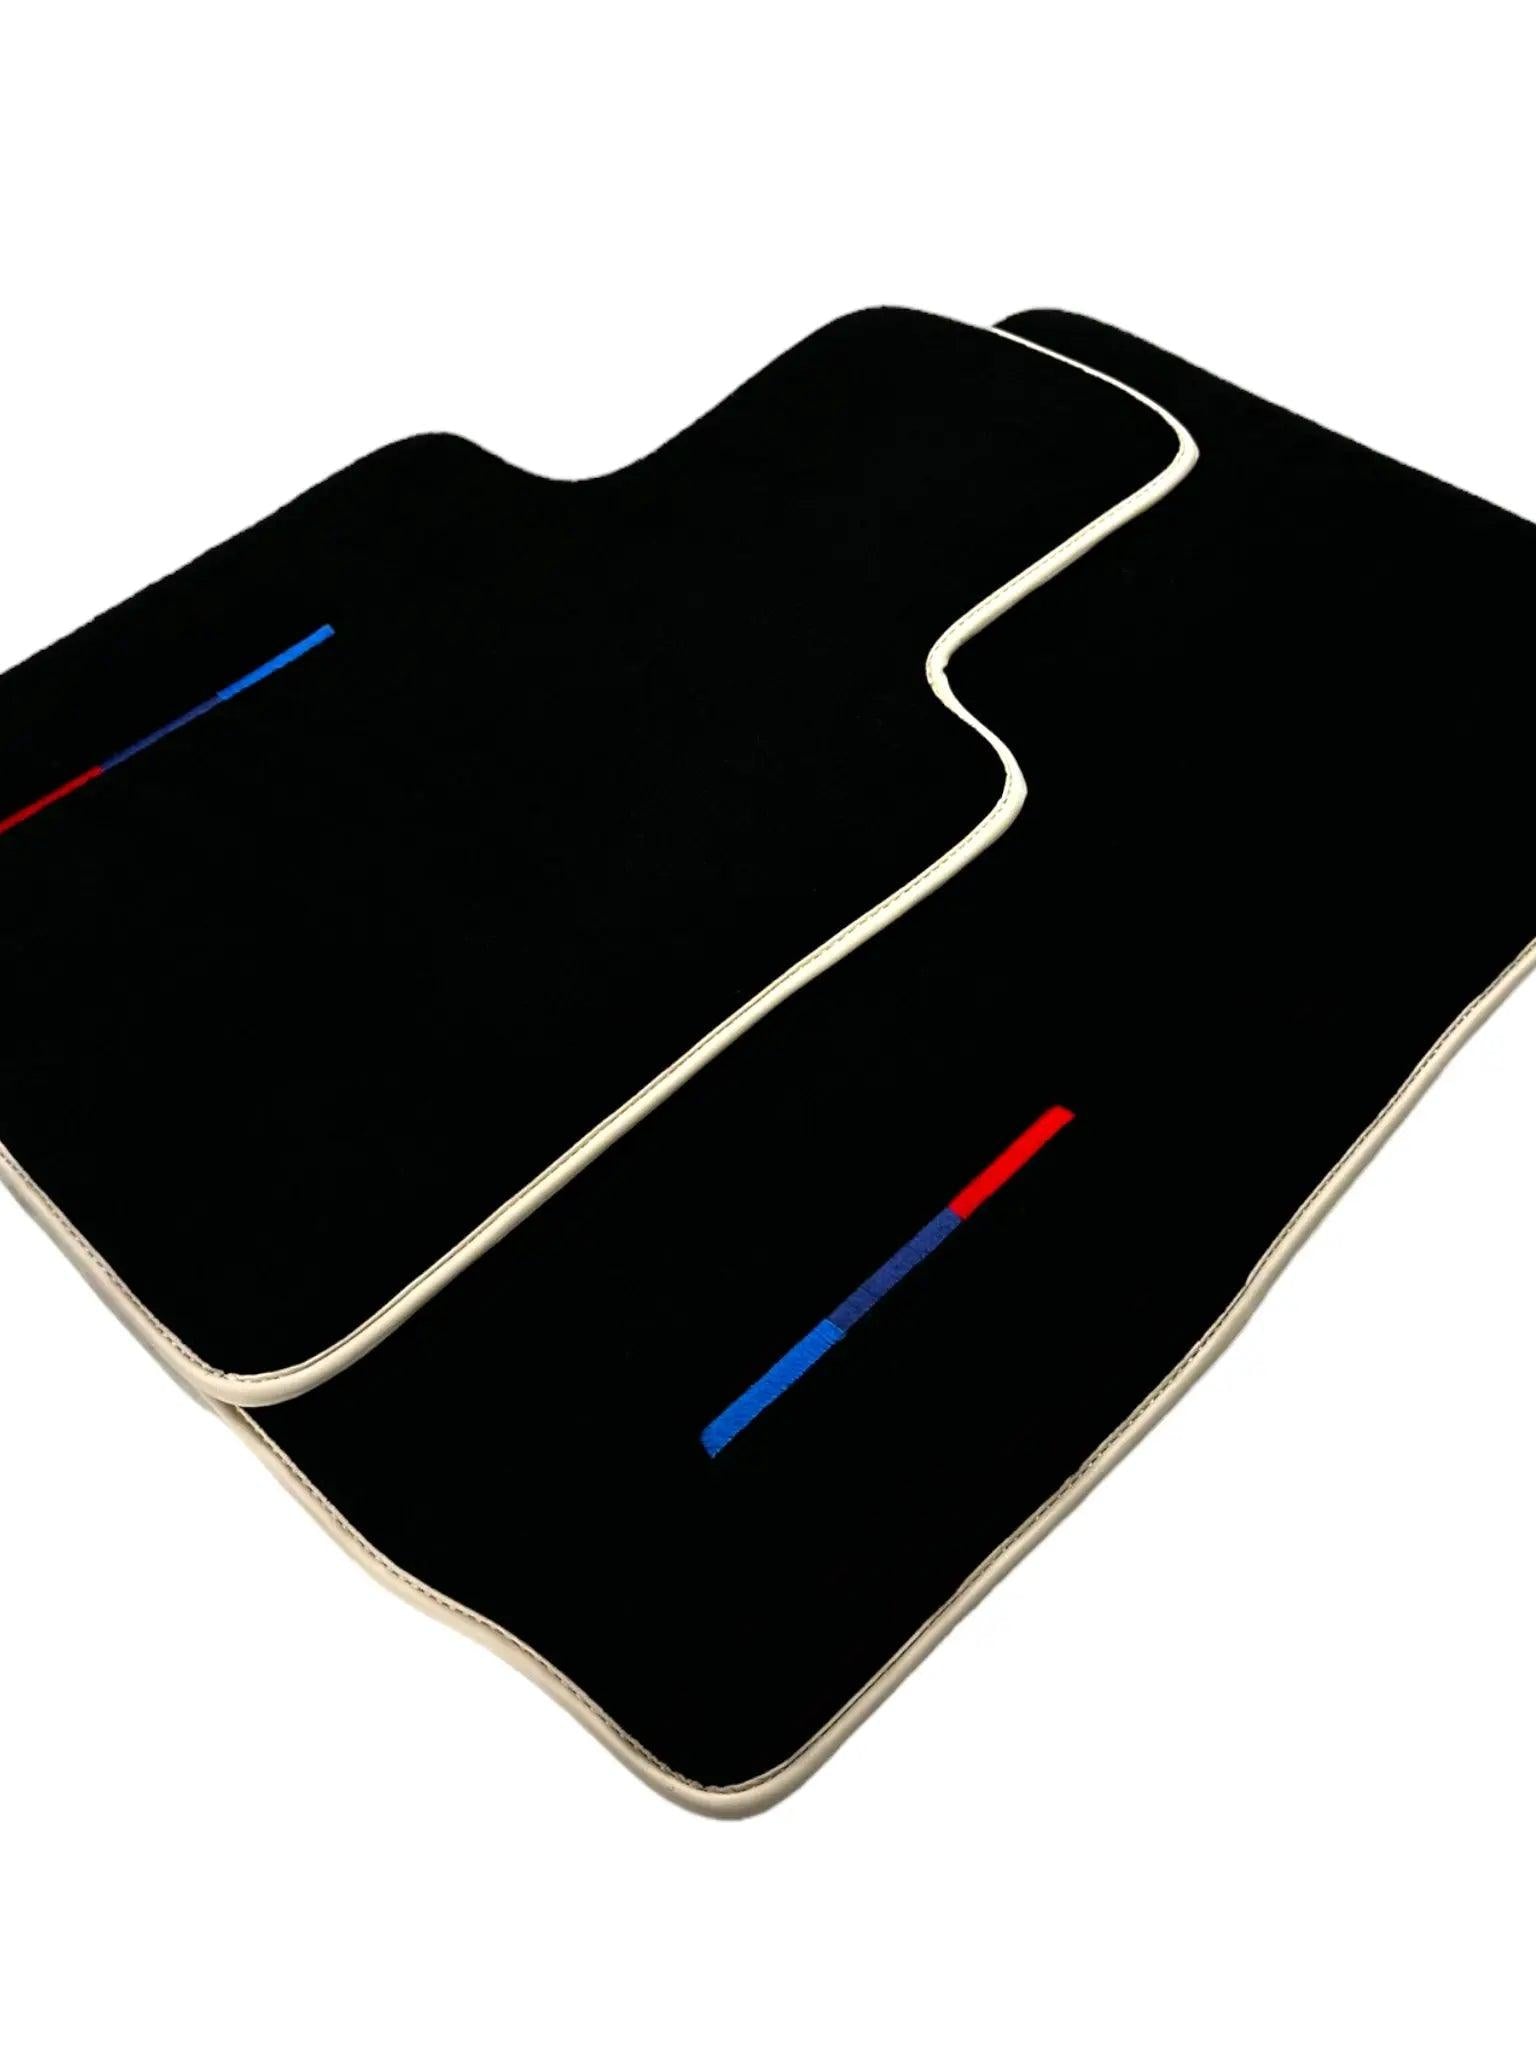 Black Floor Mats For BMW Z4 Series E89 With Color Stripes and Beige Trim Tailored Set Perfect Fit